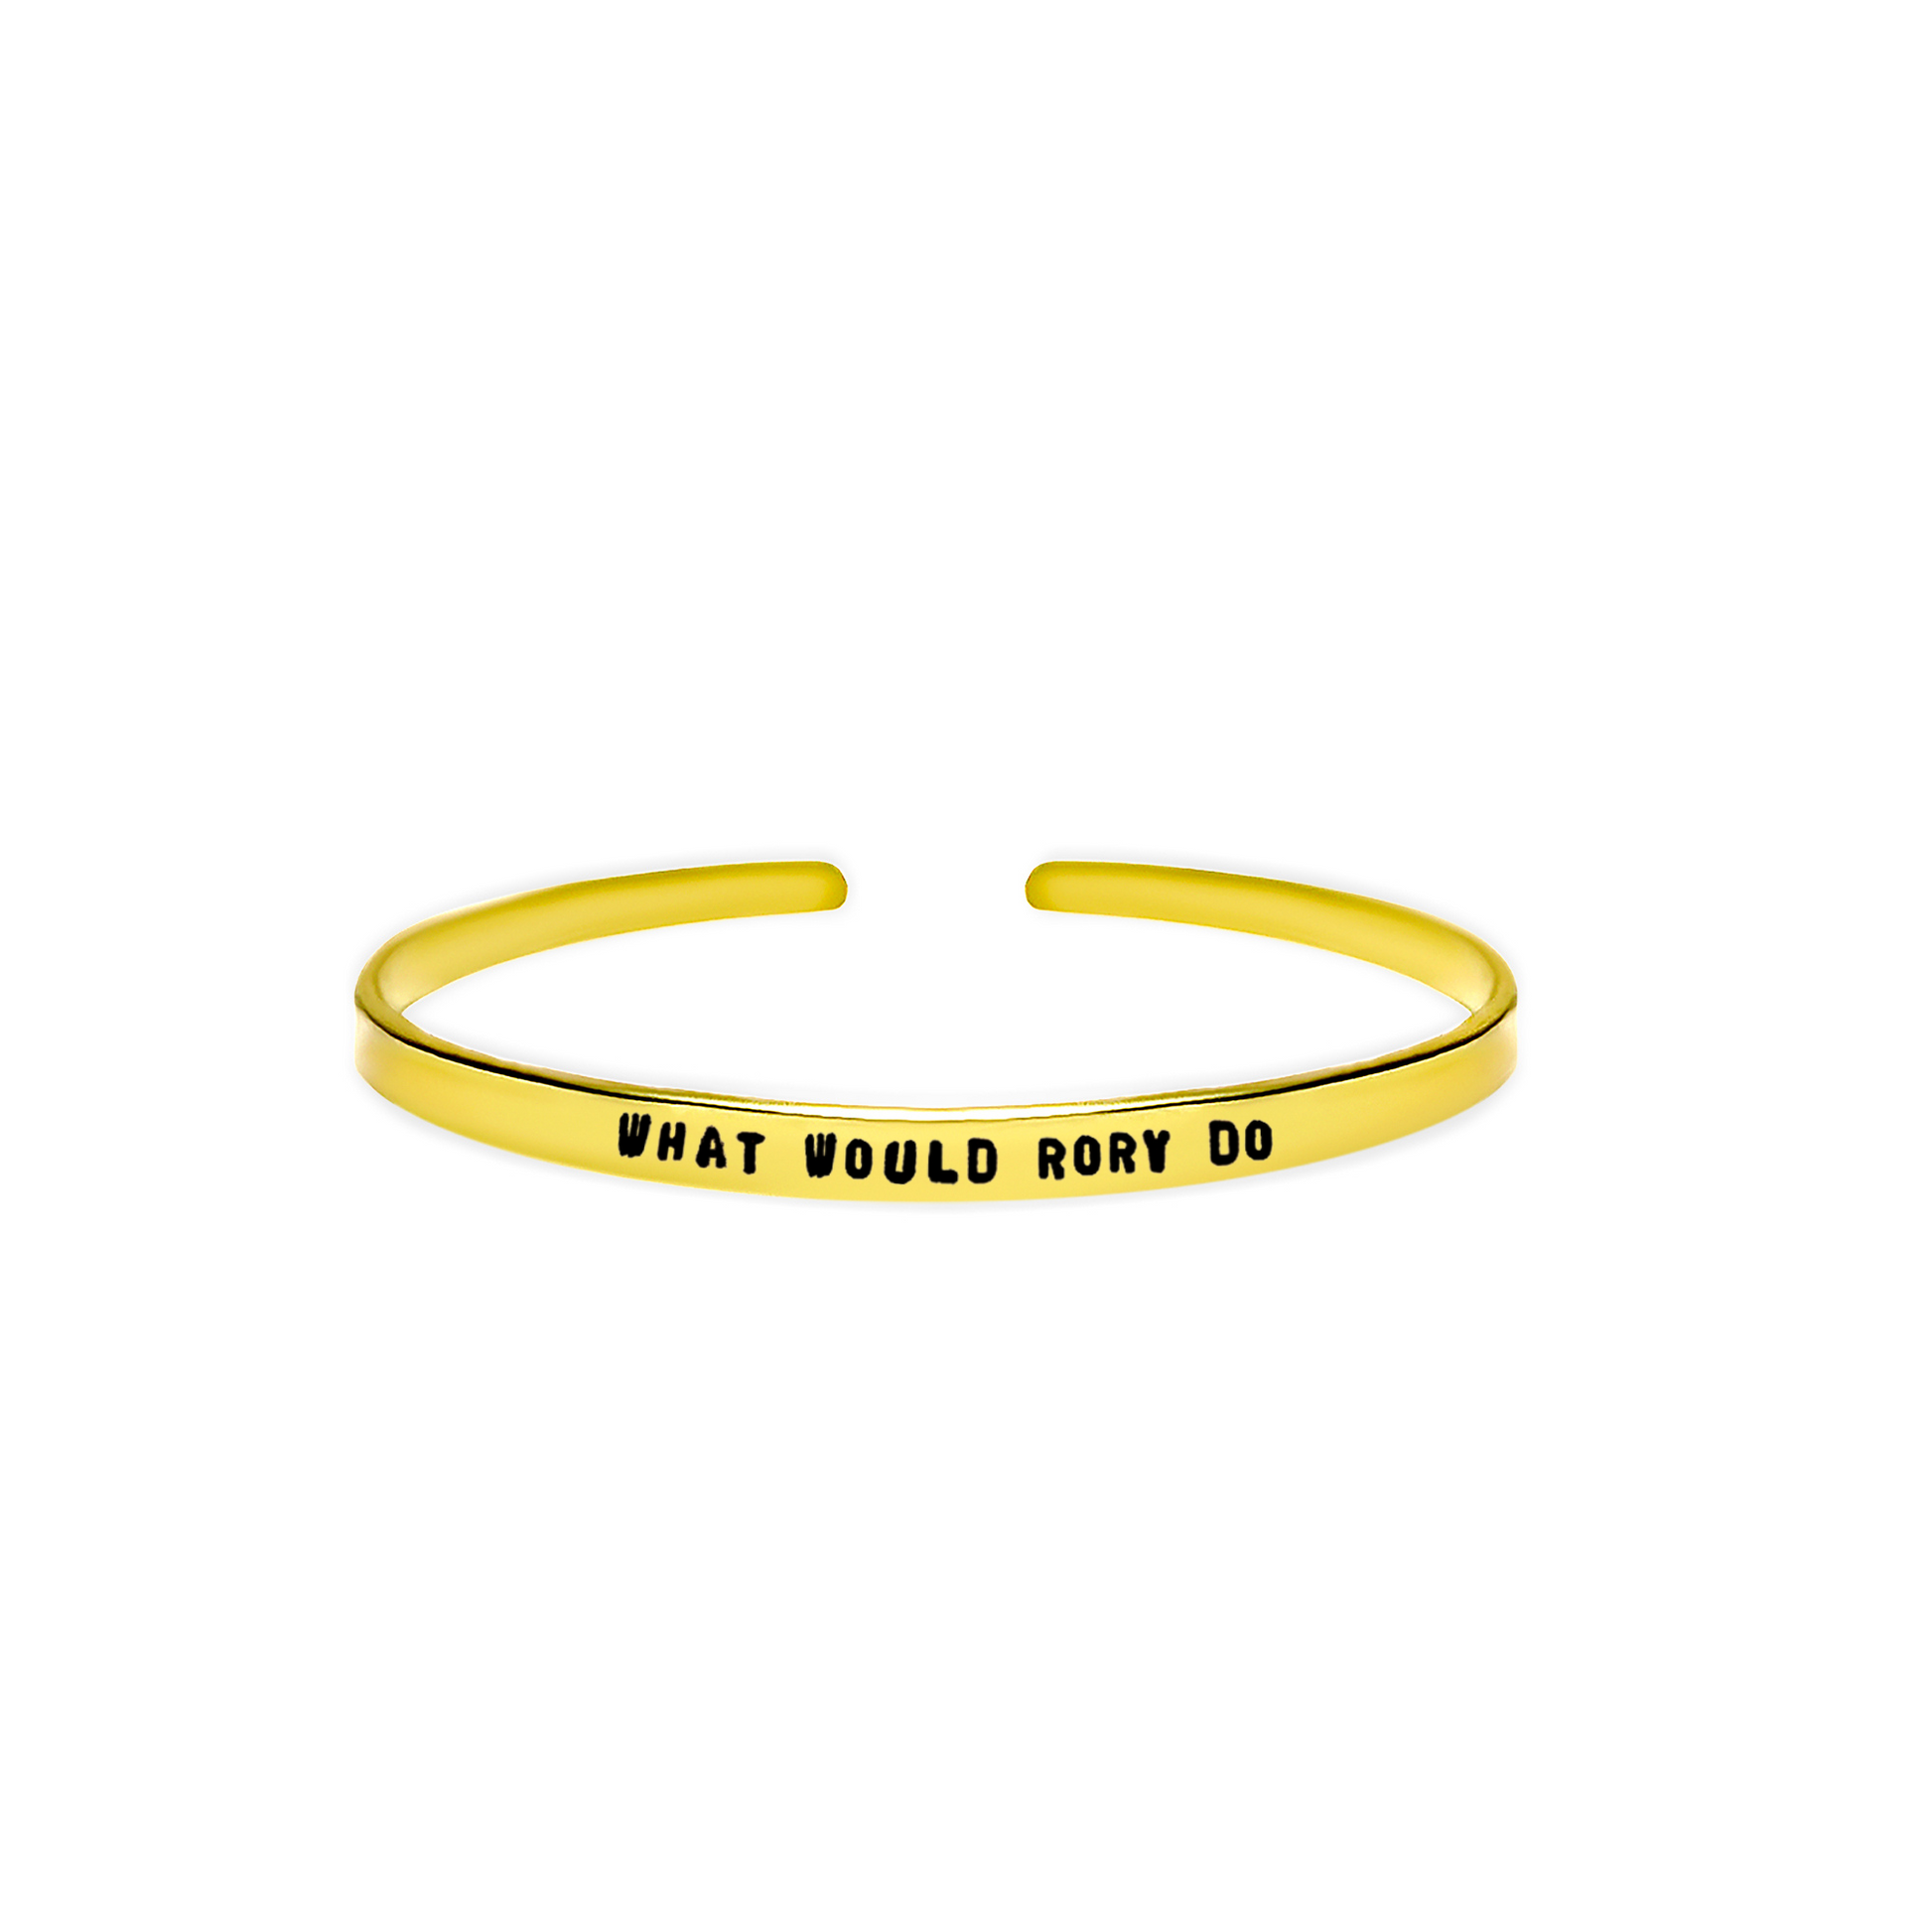 'What would Rory do' pop culture TV show inspired Gilmore Girls Rory Gilmore bracelet